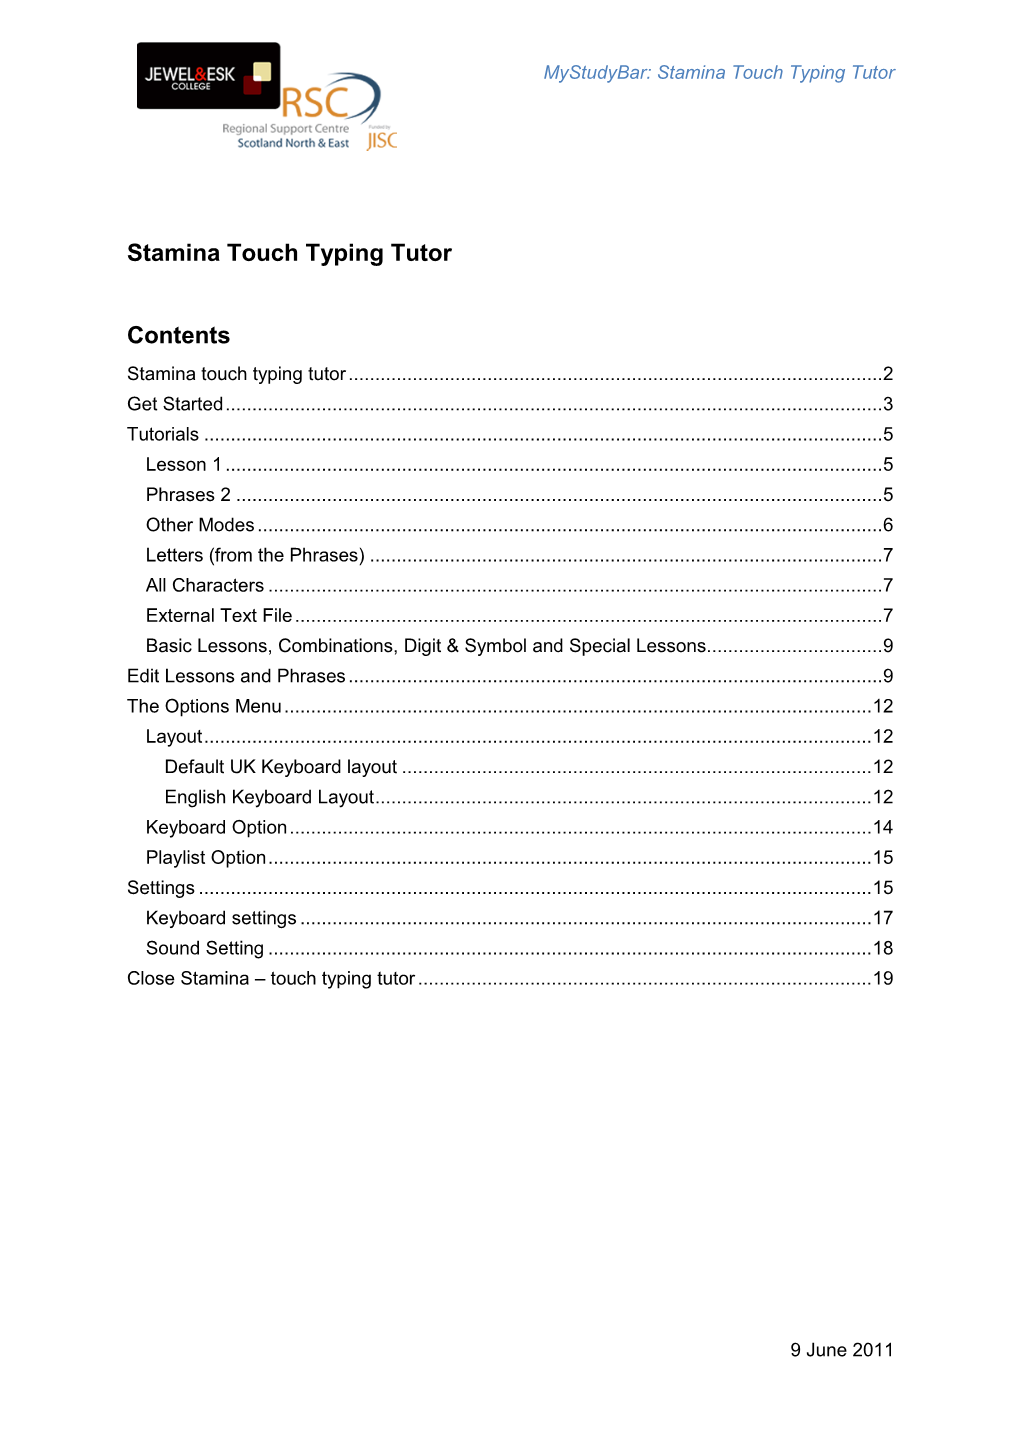 Stamina Touch Typing Tutor Contents